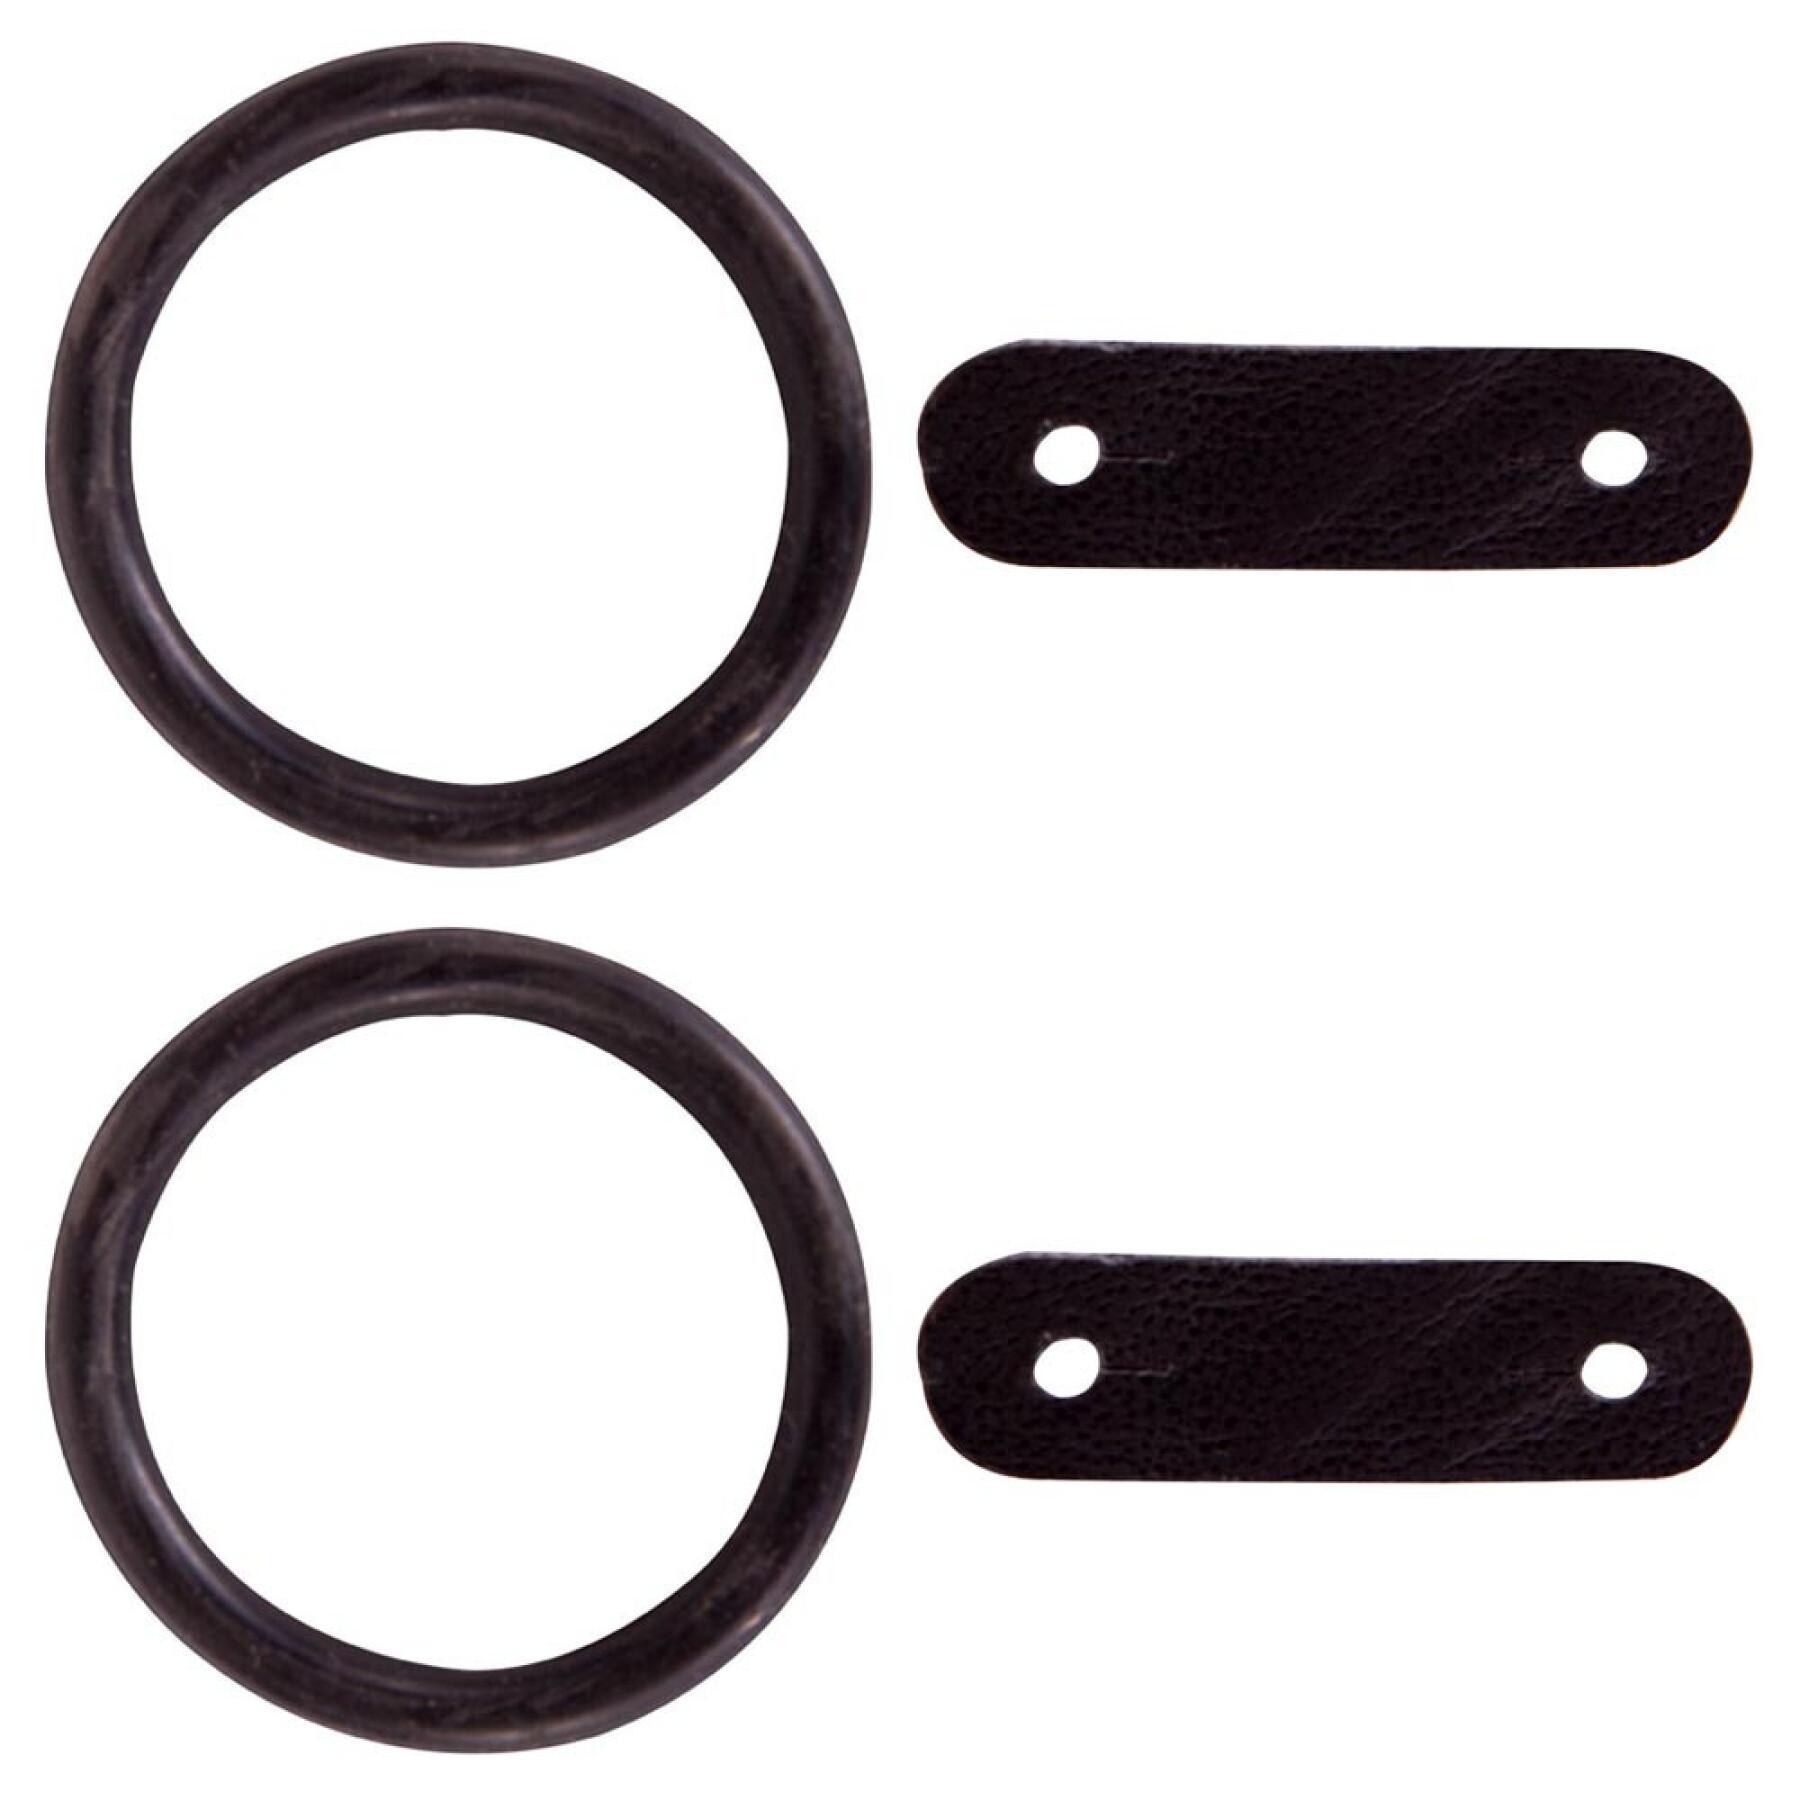 Rubber rings + leather straps for safety stirrups BR Equitation